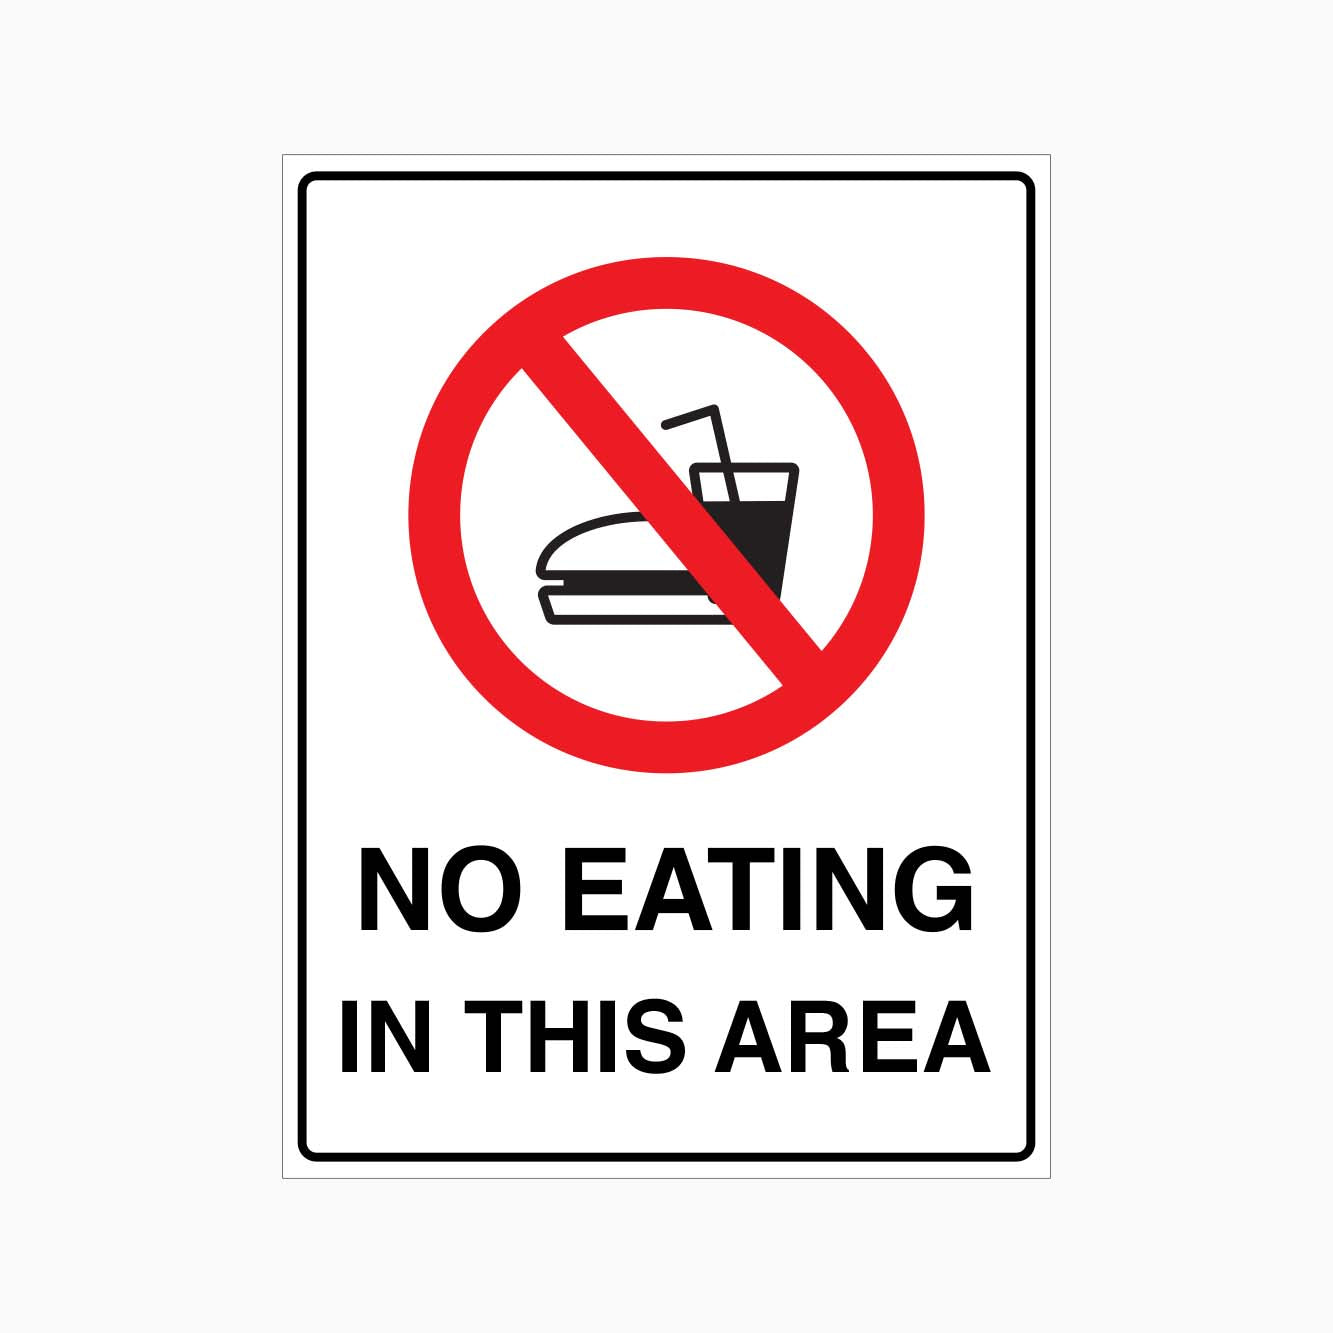 NO EATING IN THIS AREA SIGN - GET SIGNS